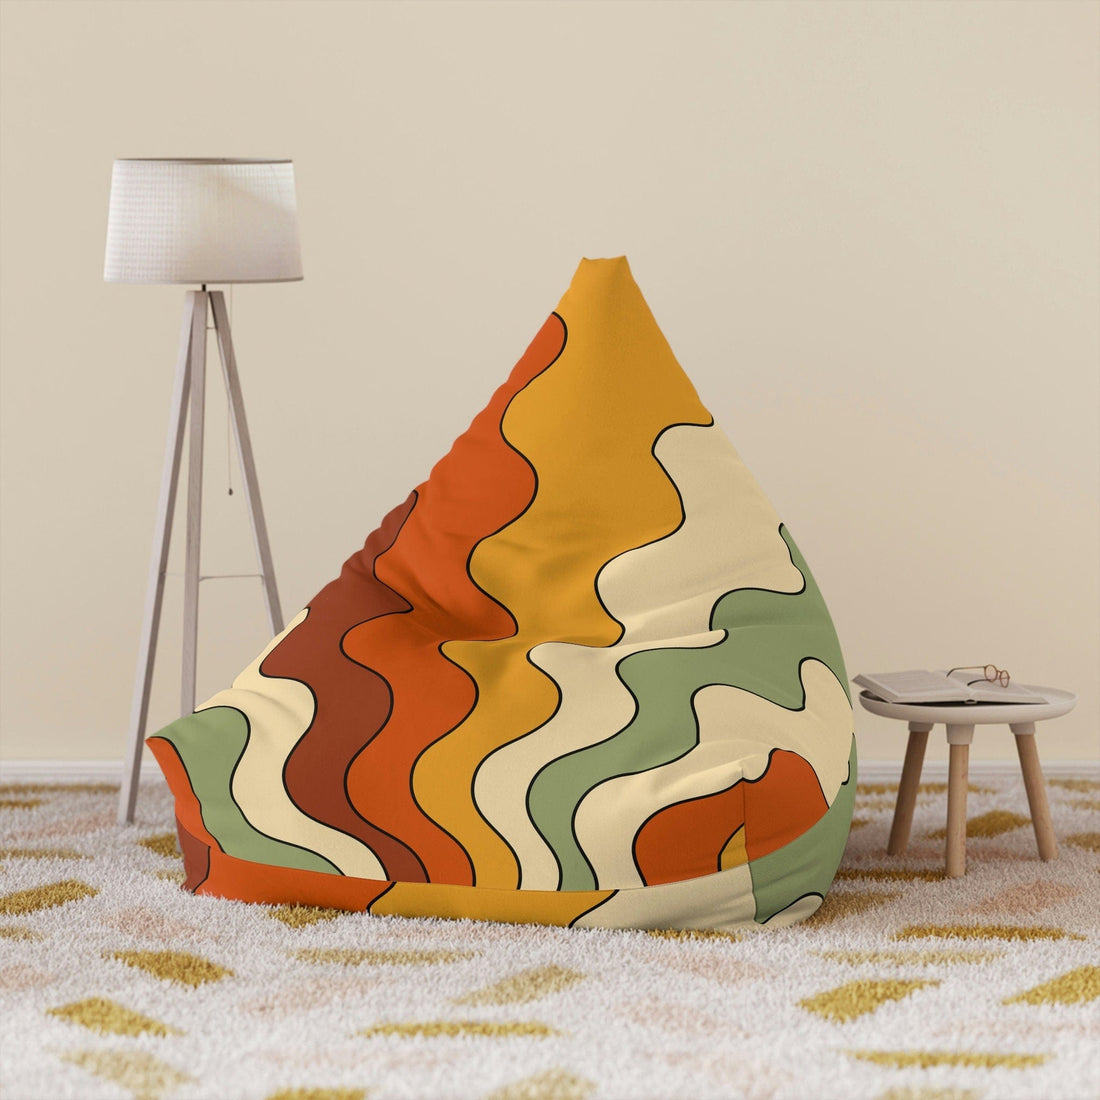 Kate McEnroe New York 70s Retro Groovy Hippie Bean Bag Chair Cover, Mid Century Modern Psychedelic Wavy Bean Bag Cover for Teens and Adults, Dorm Room DecorBean Bag Chair Covers46777178058847228534